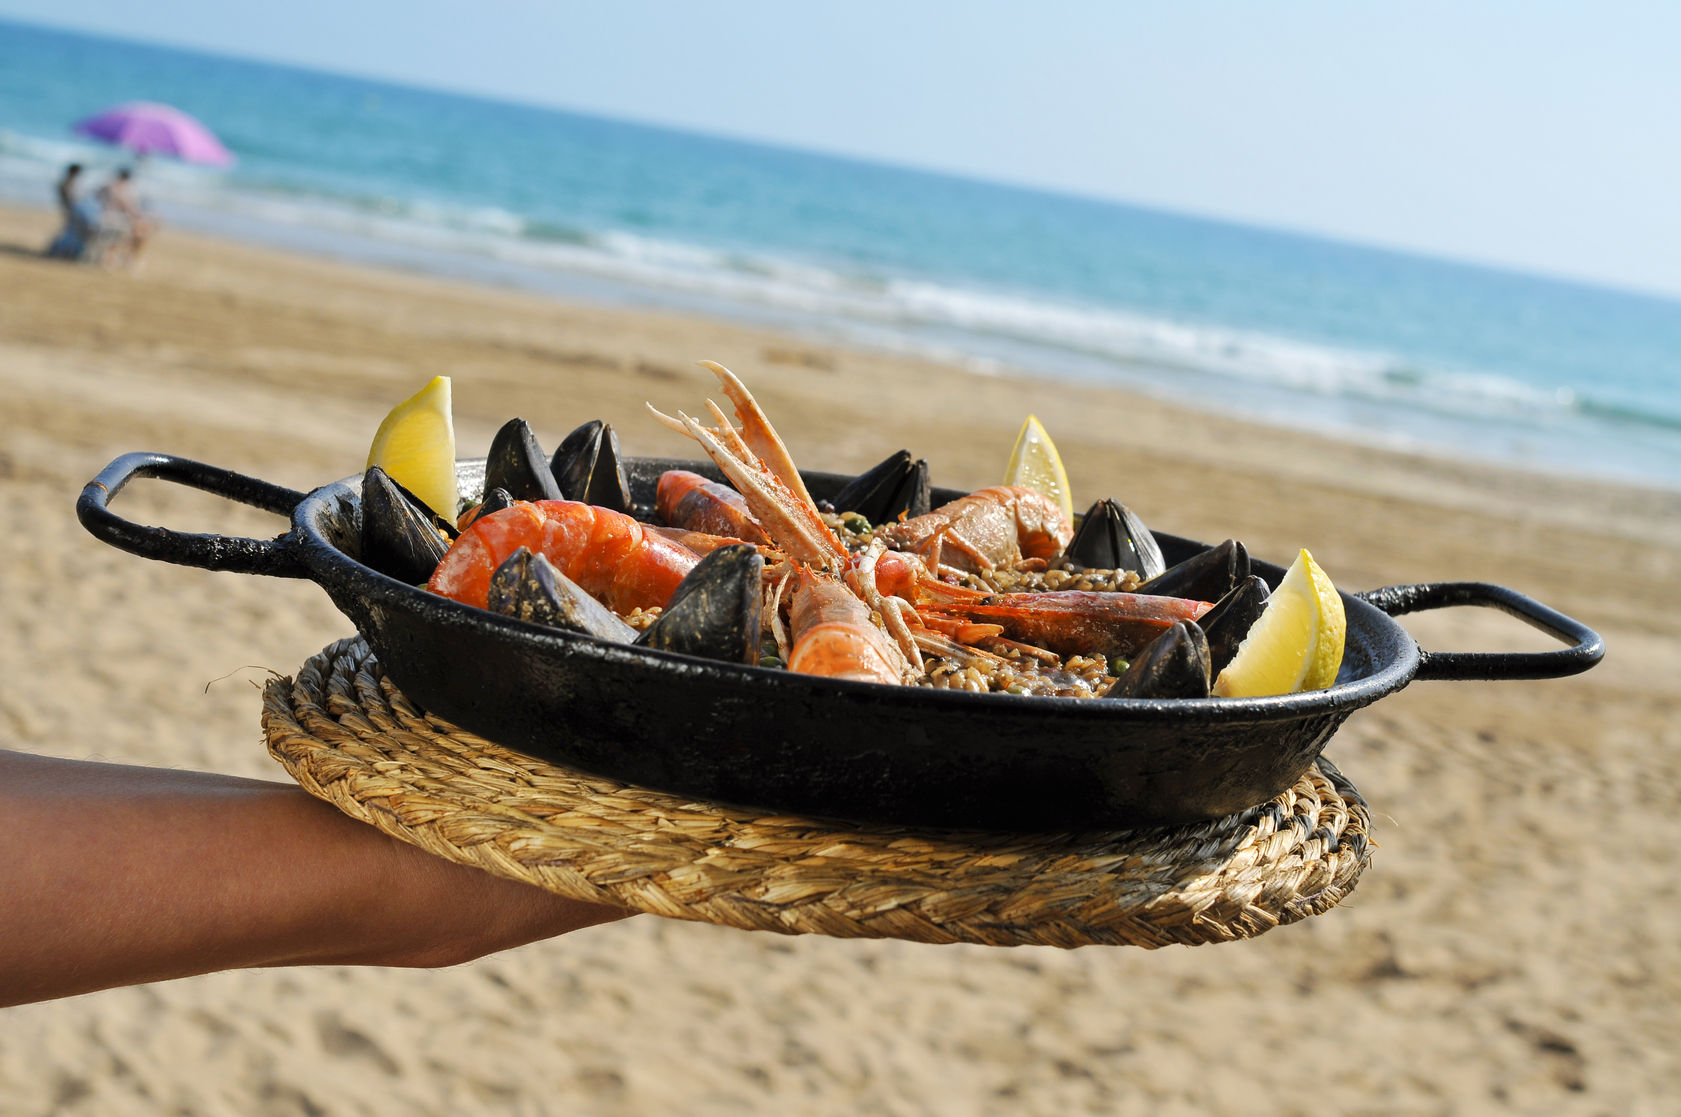 32139727 - a typical spanish paella with seafood in a paellera, the paella pan, on the beach